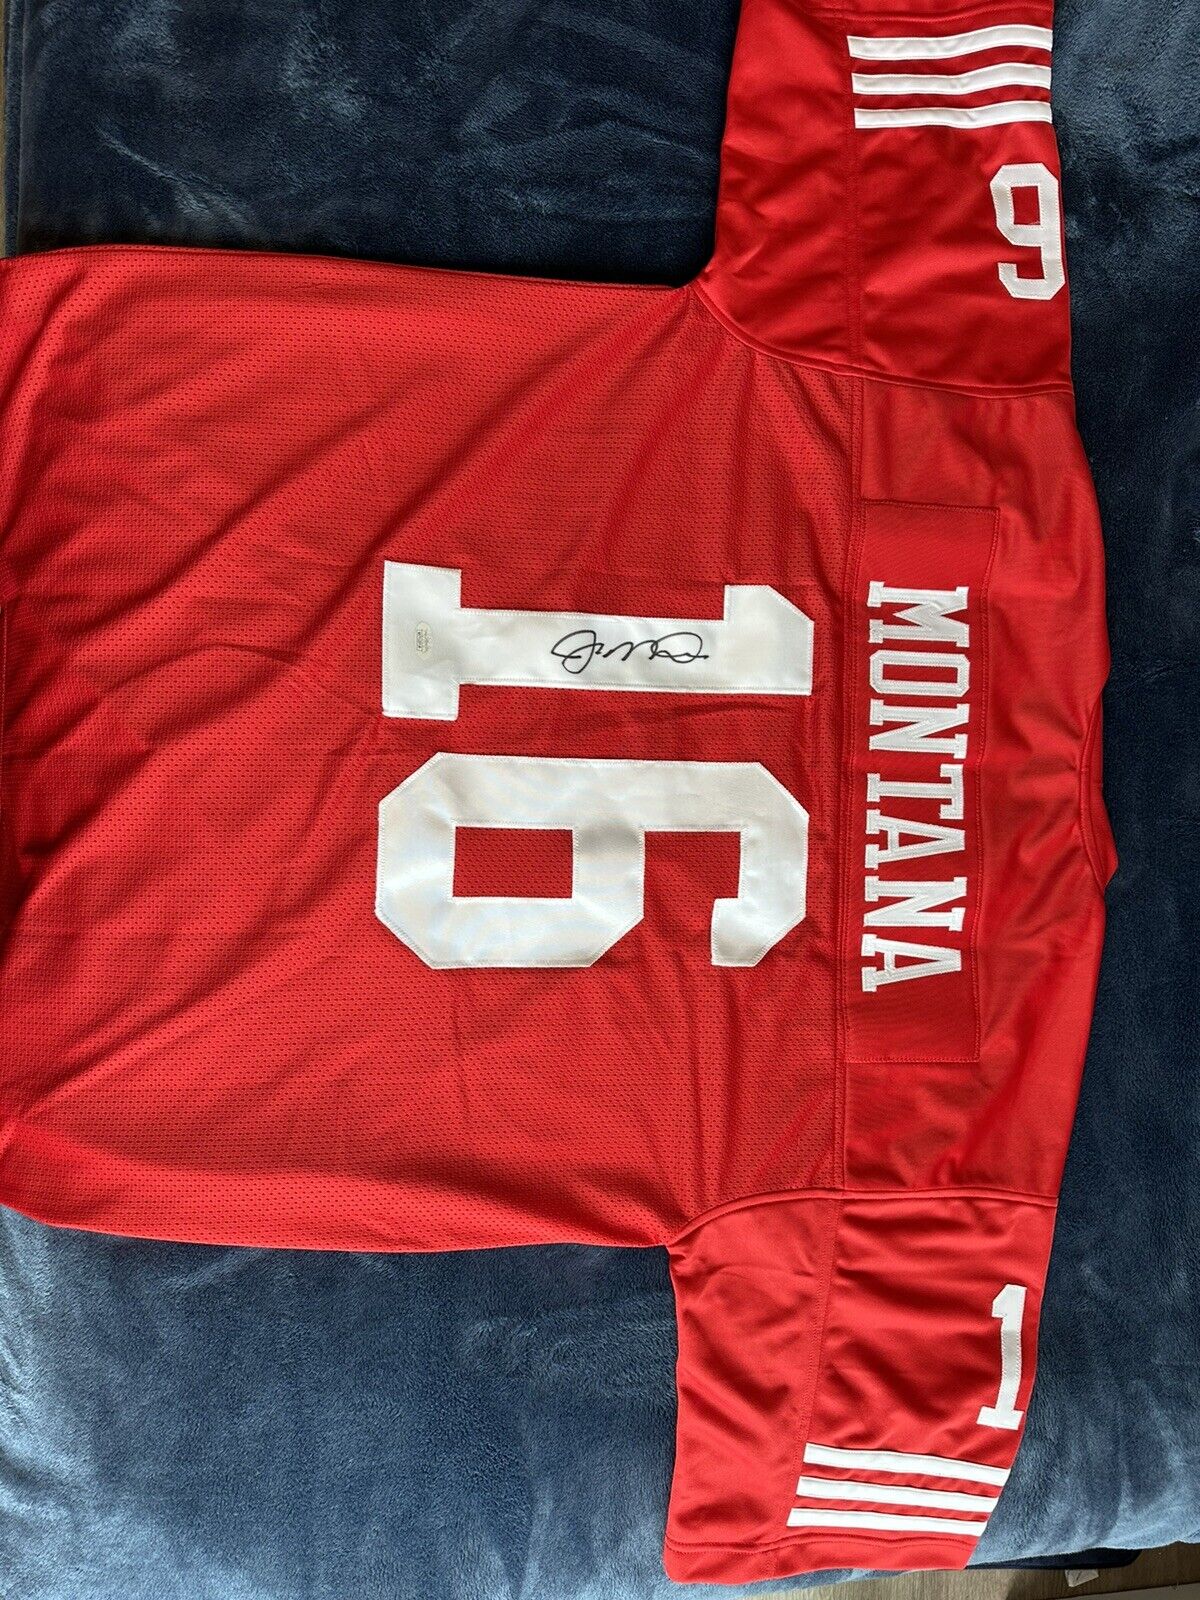 Need To Sale Joe Montana Jersey With His Autographic .